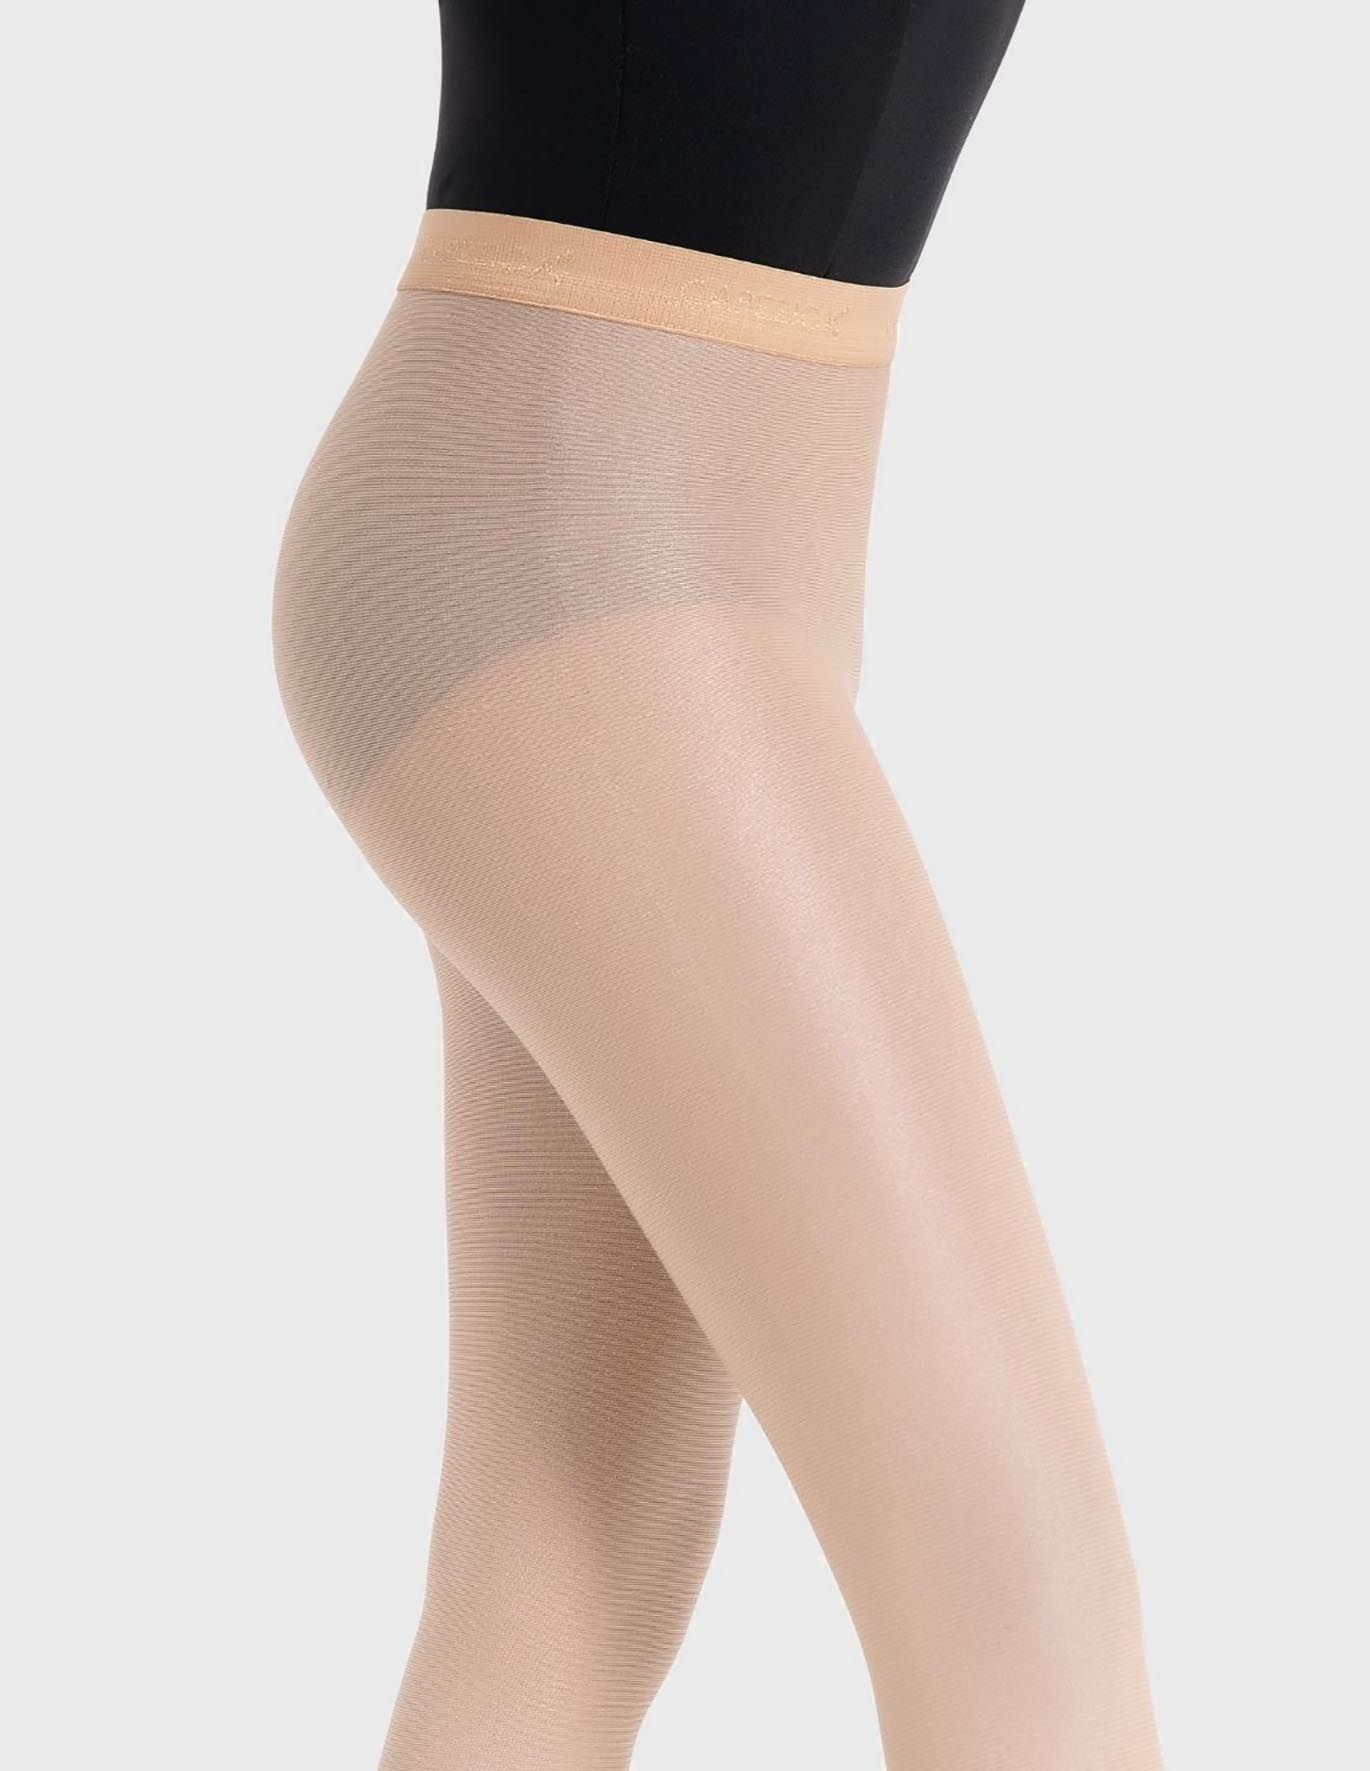 Capezio Ultra Shimmery Footed Dance Tights Model 1808